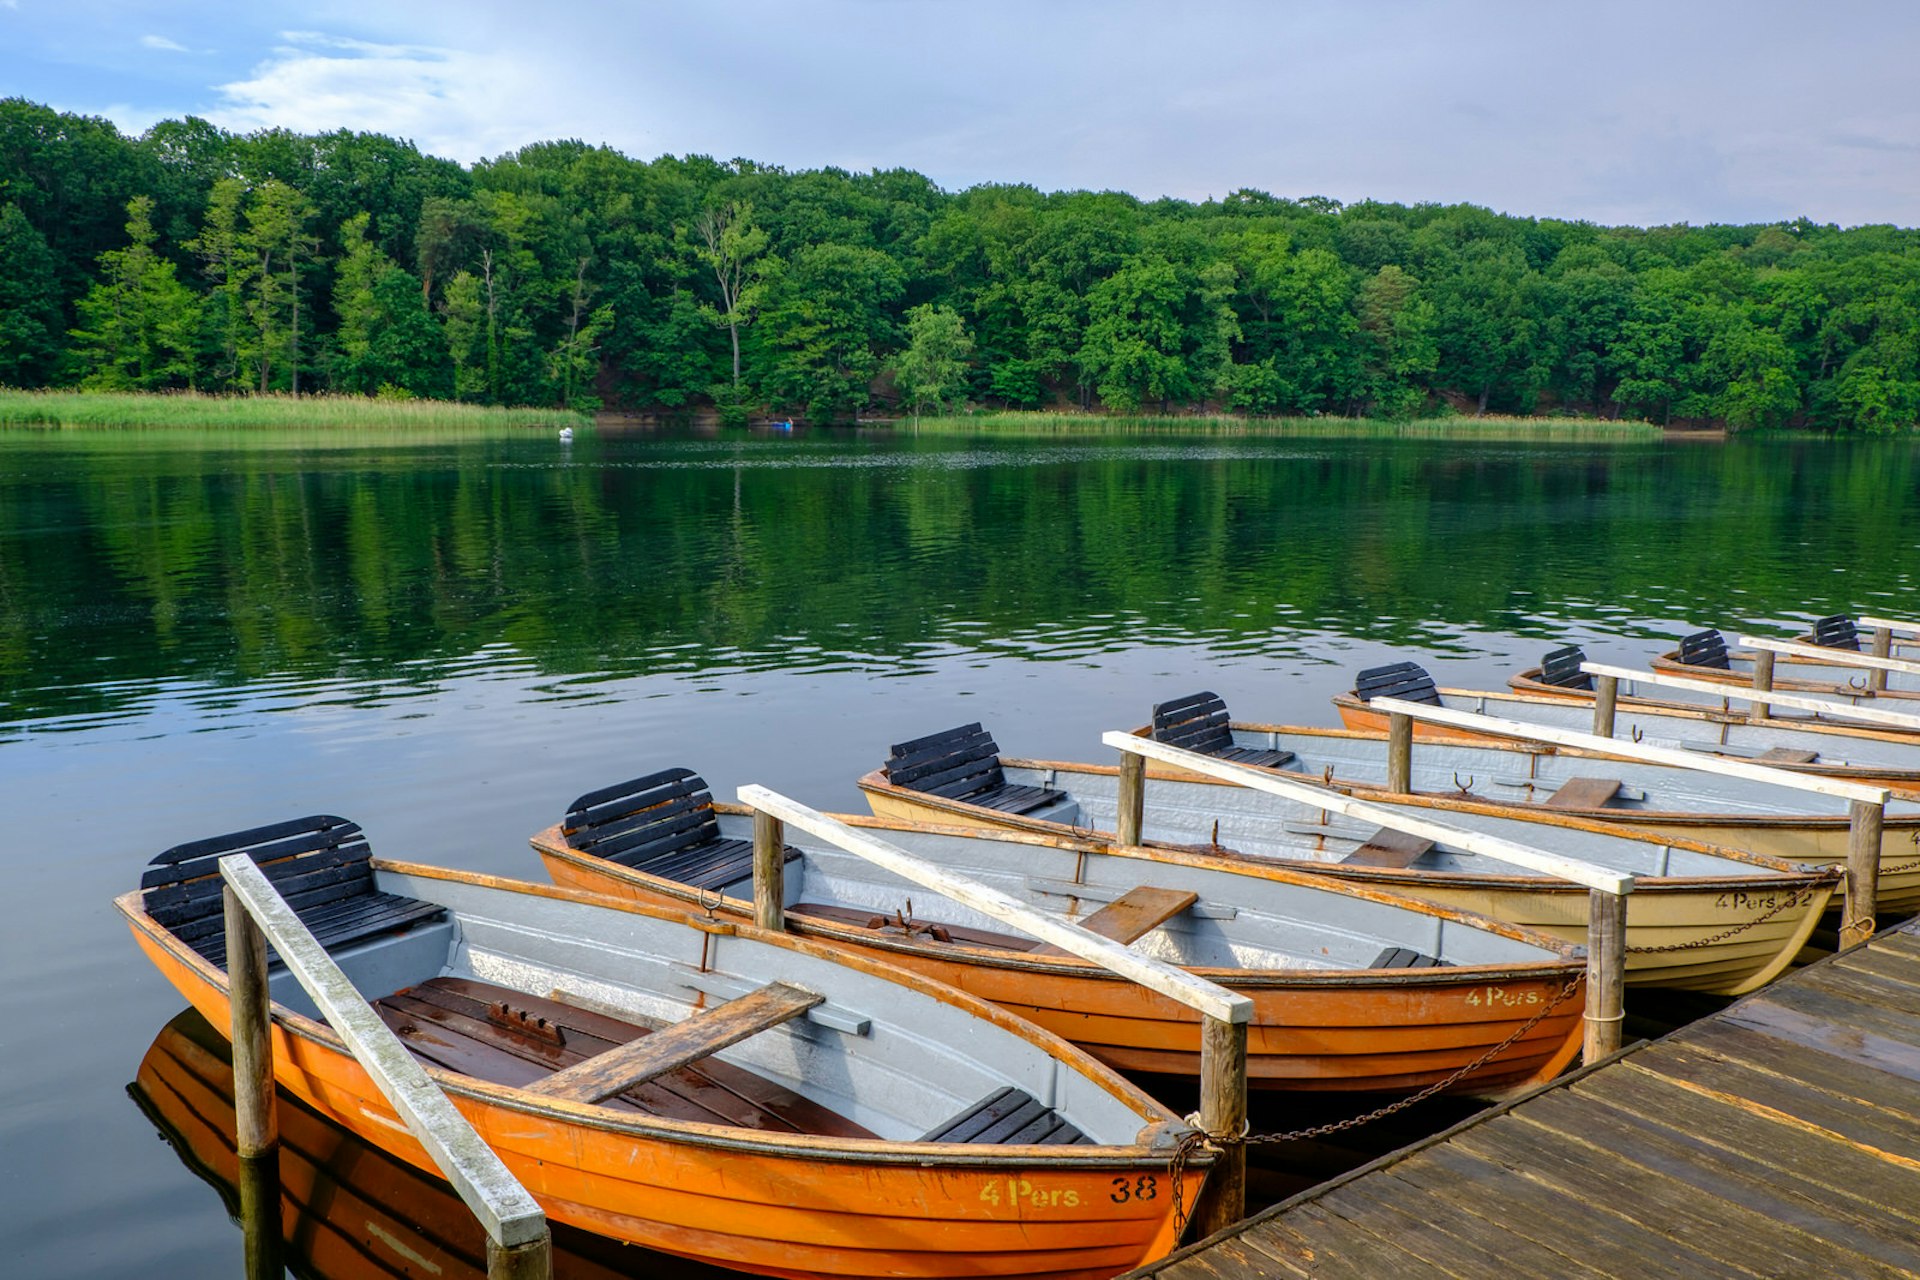 Berlin day trips - recreational boats moored along the bank of Schlachtensee. The boats have orange wooden exteriors and are painted white on the inside. The lake is calm and we can see lovely green trees on the opposite bank